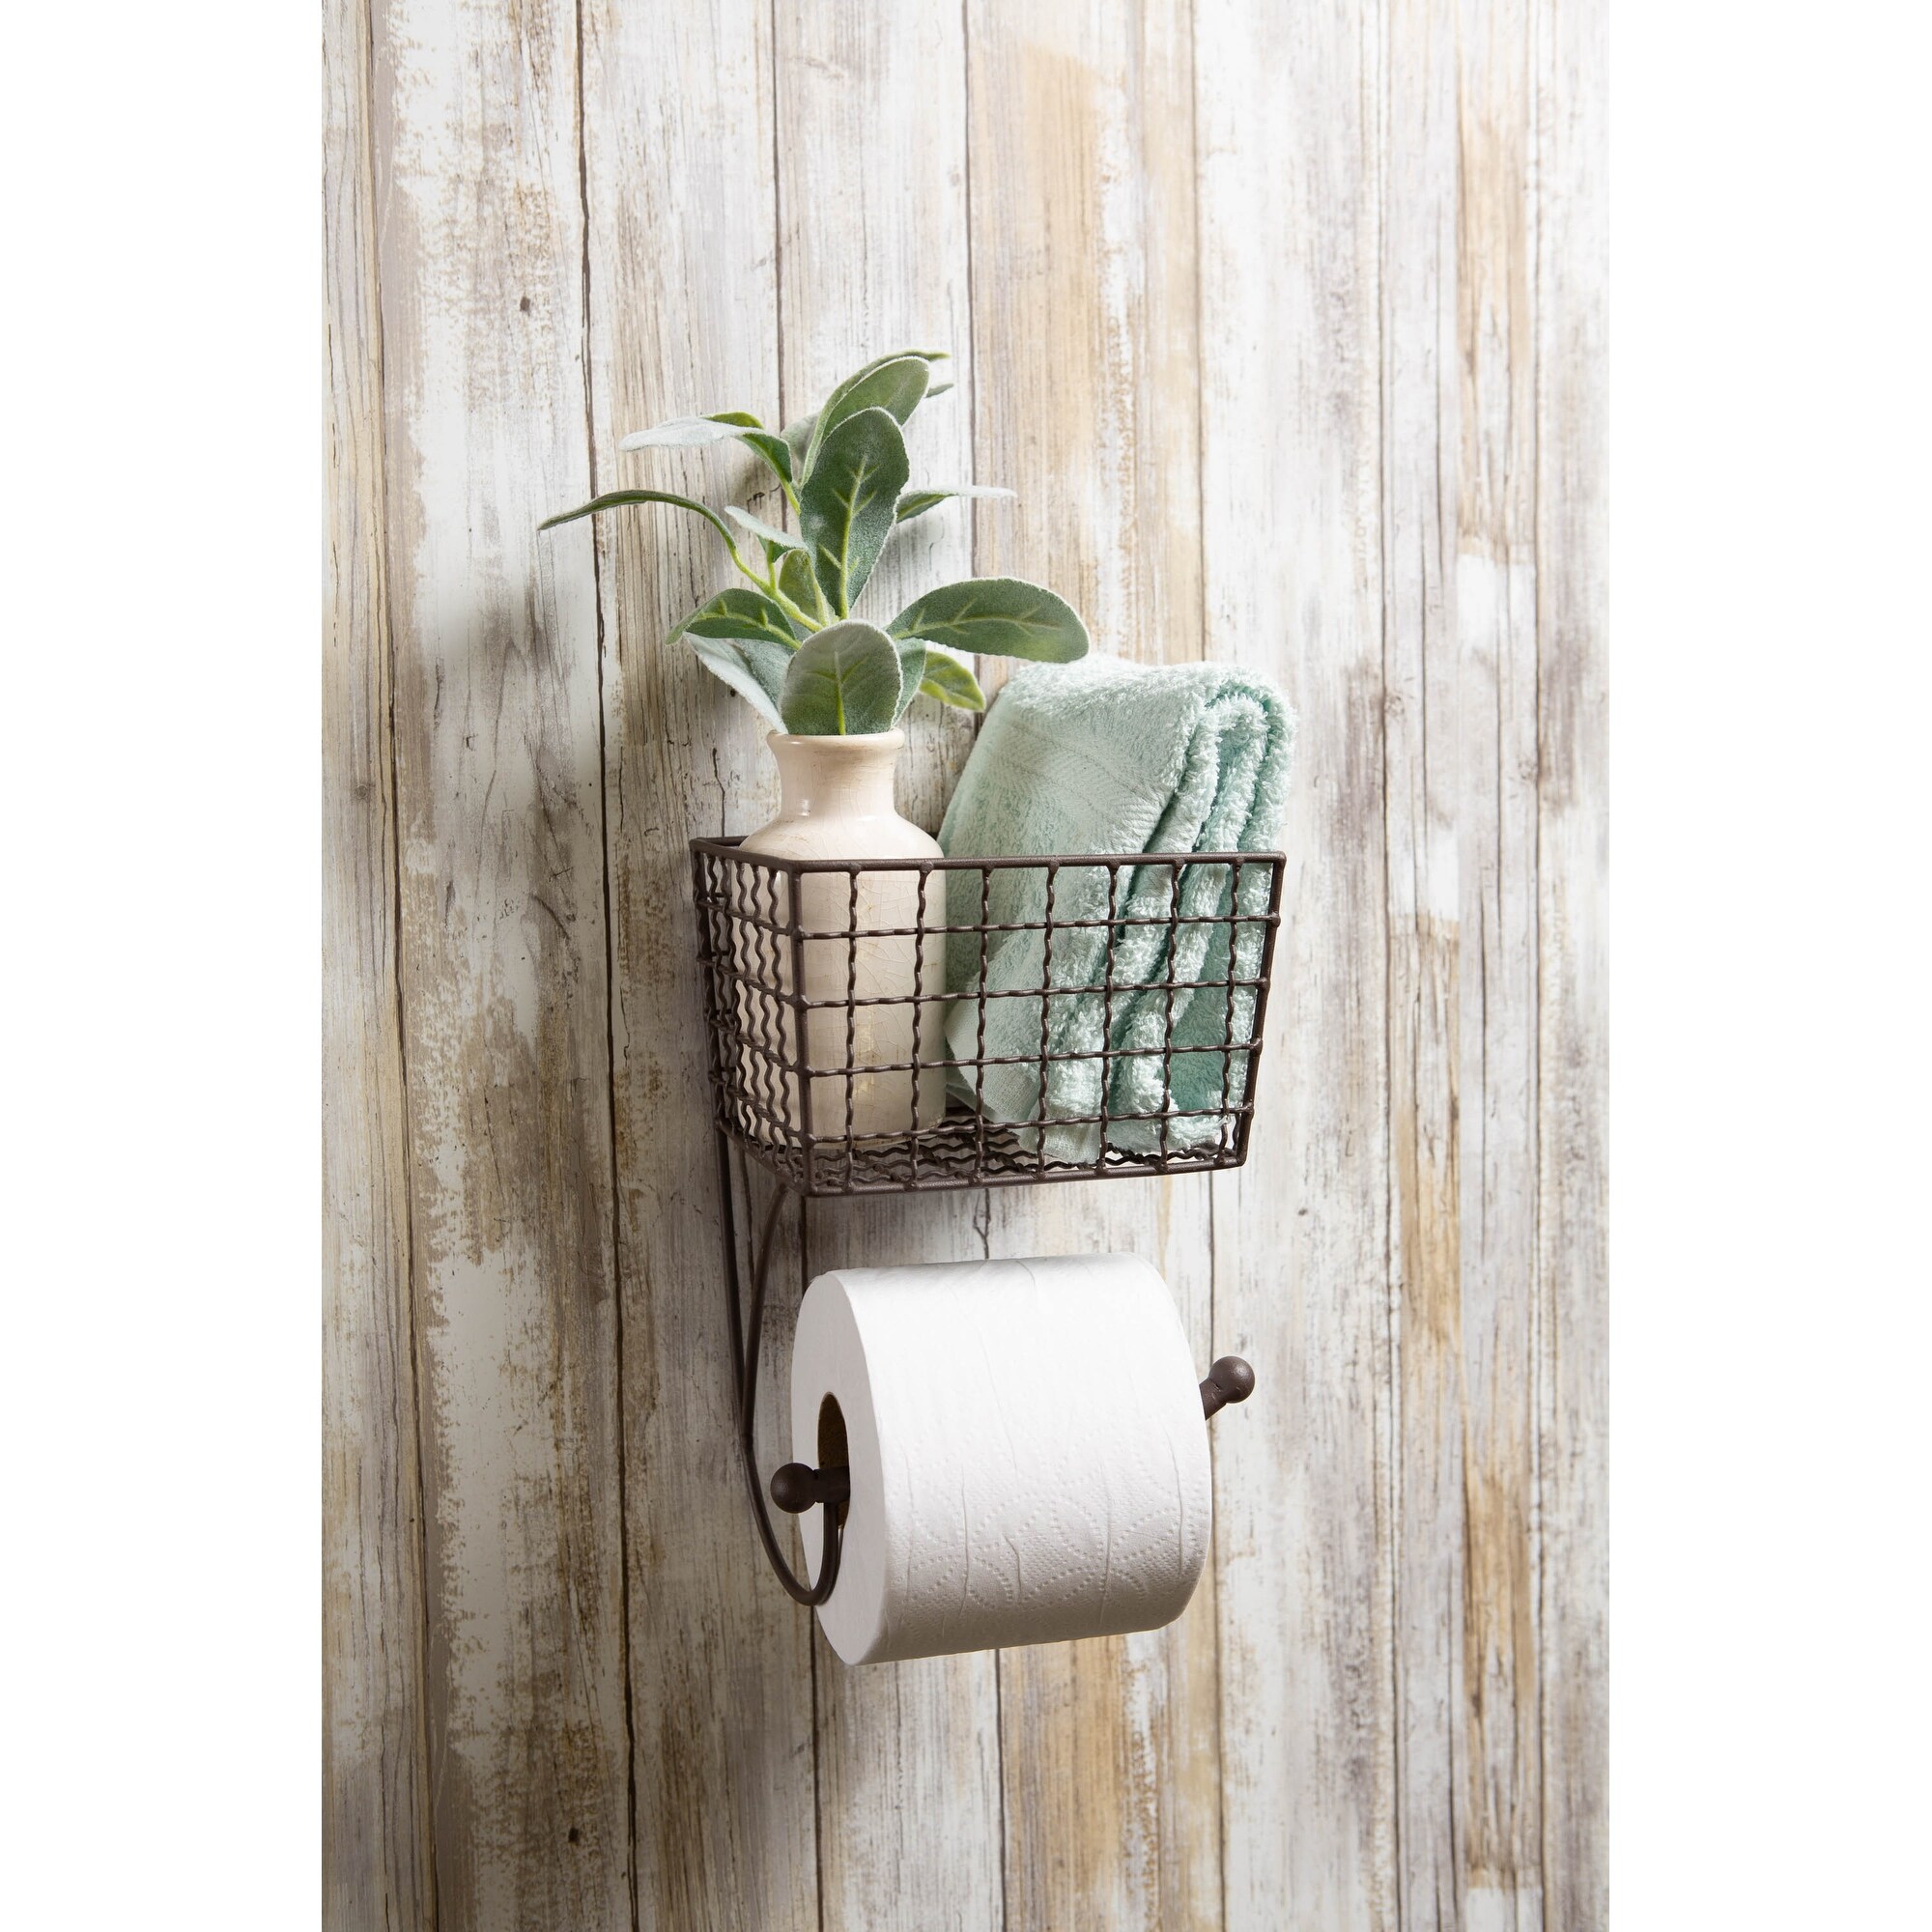 https://ak1.ostkcdn.com/images/products/is/images/direct/7fb700caffce9c799e73e3c3ce4ebeeede050a74/DII-Farmhouse-Toilet-Paper-Holder-Rustic.jpg